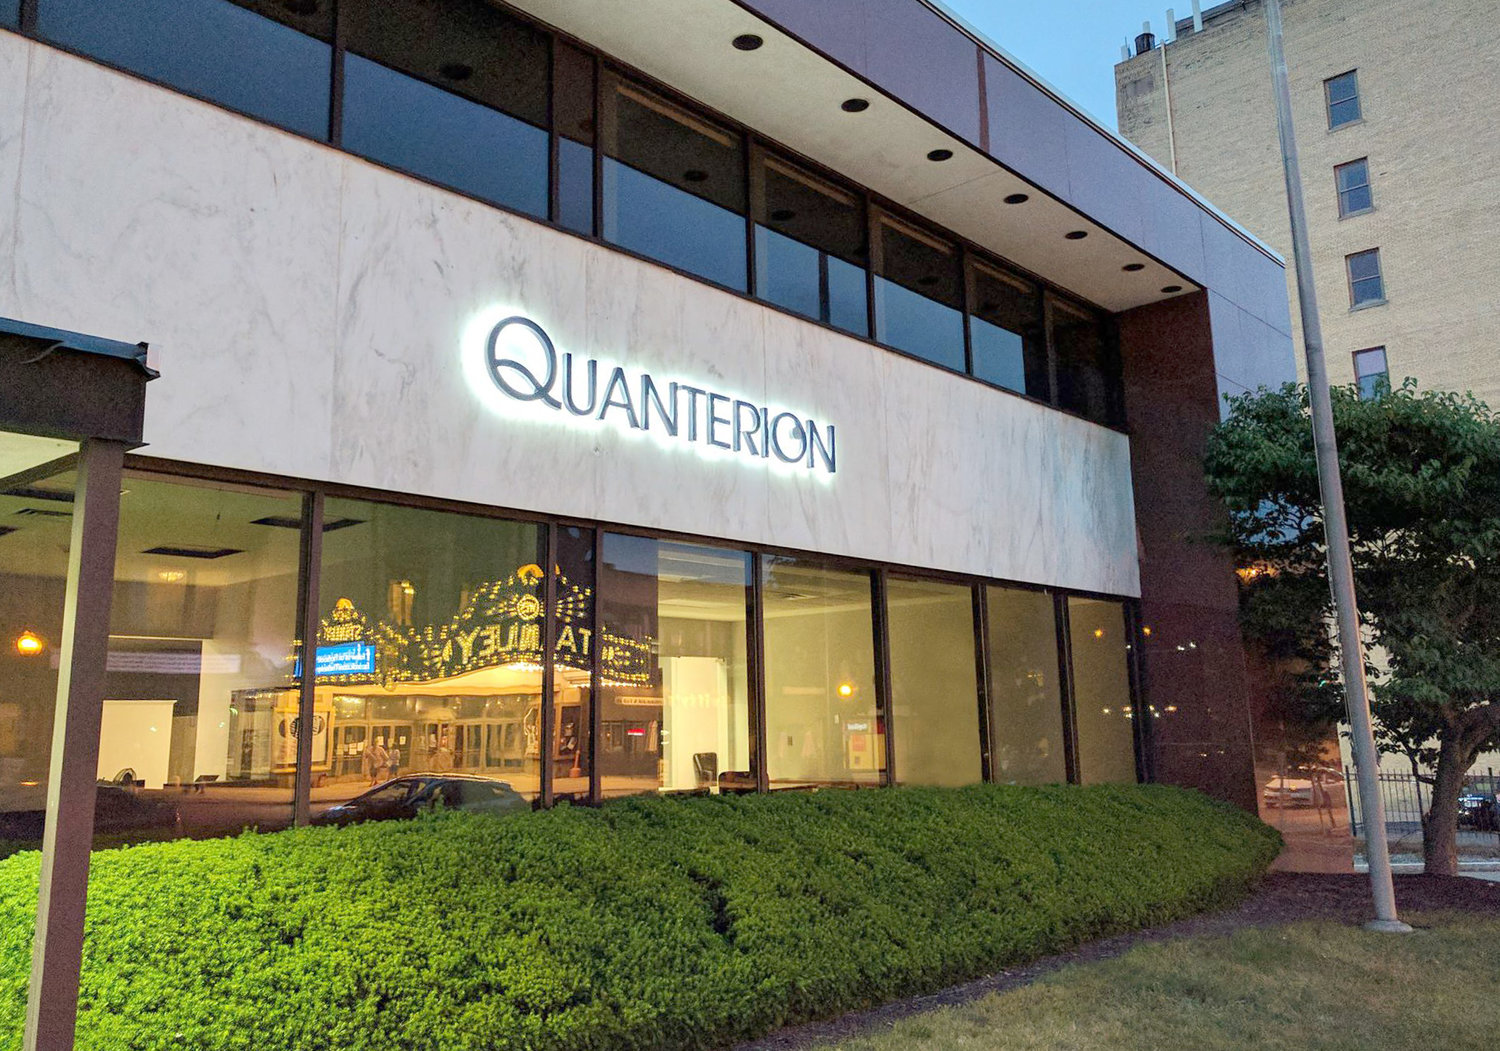 Quanterion Solutions Incorporated on Genesee Street in Utica.